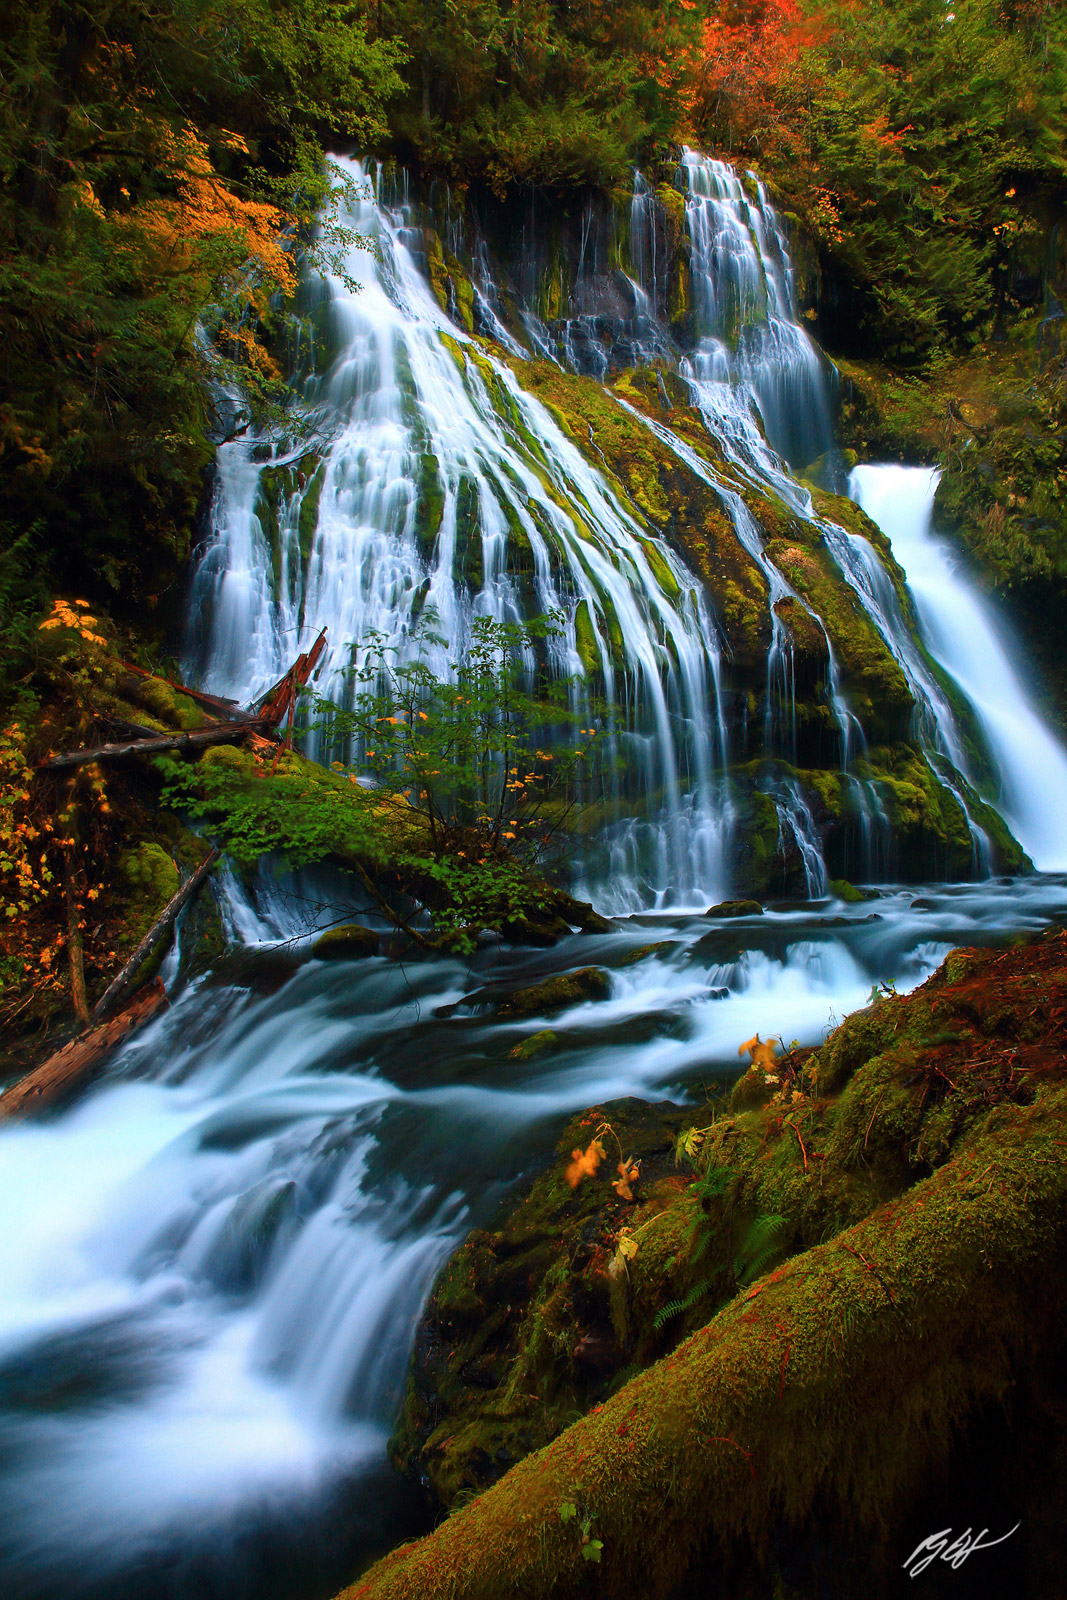 Fall Color and Panther Creek Falls in the Gifford Pinchot National Forest in Washington